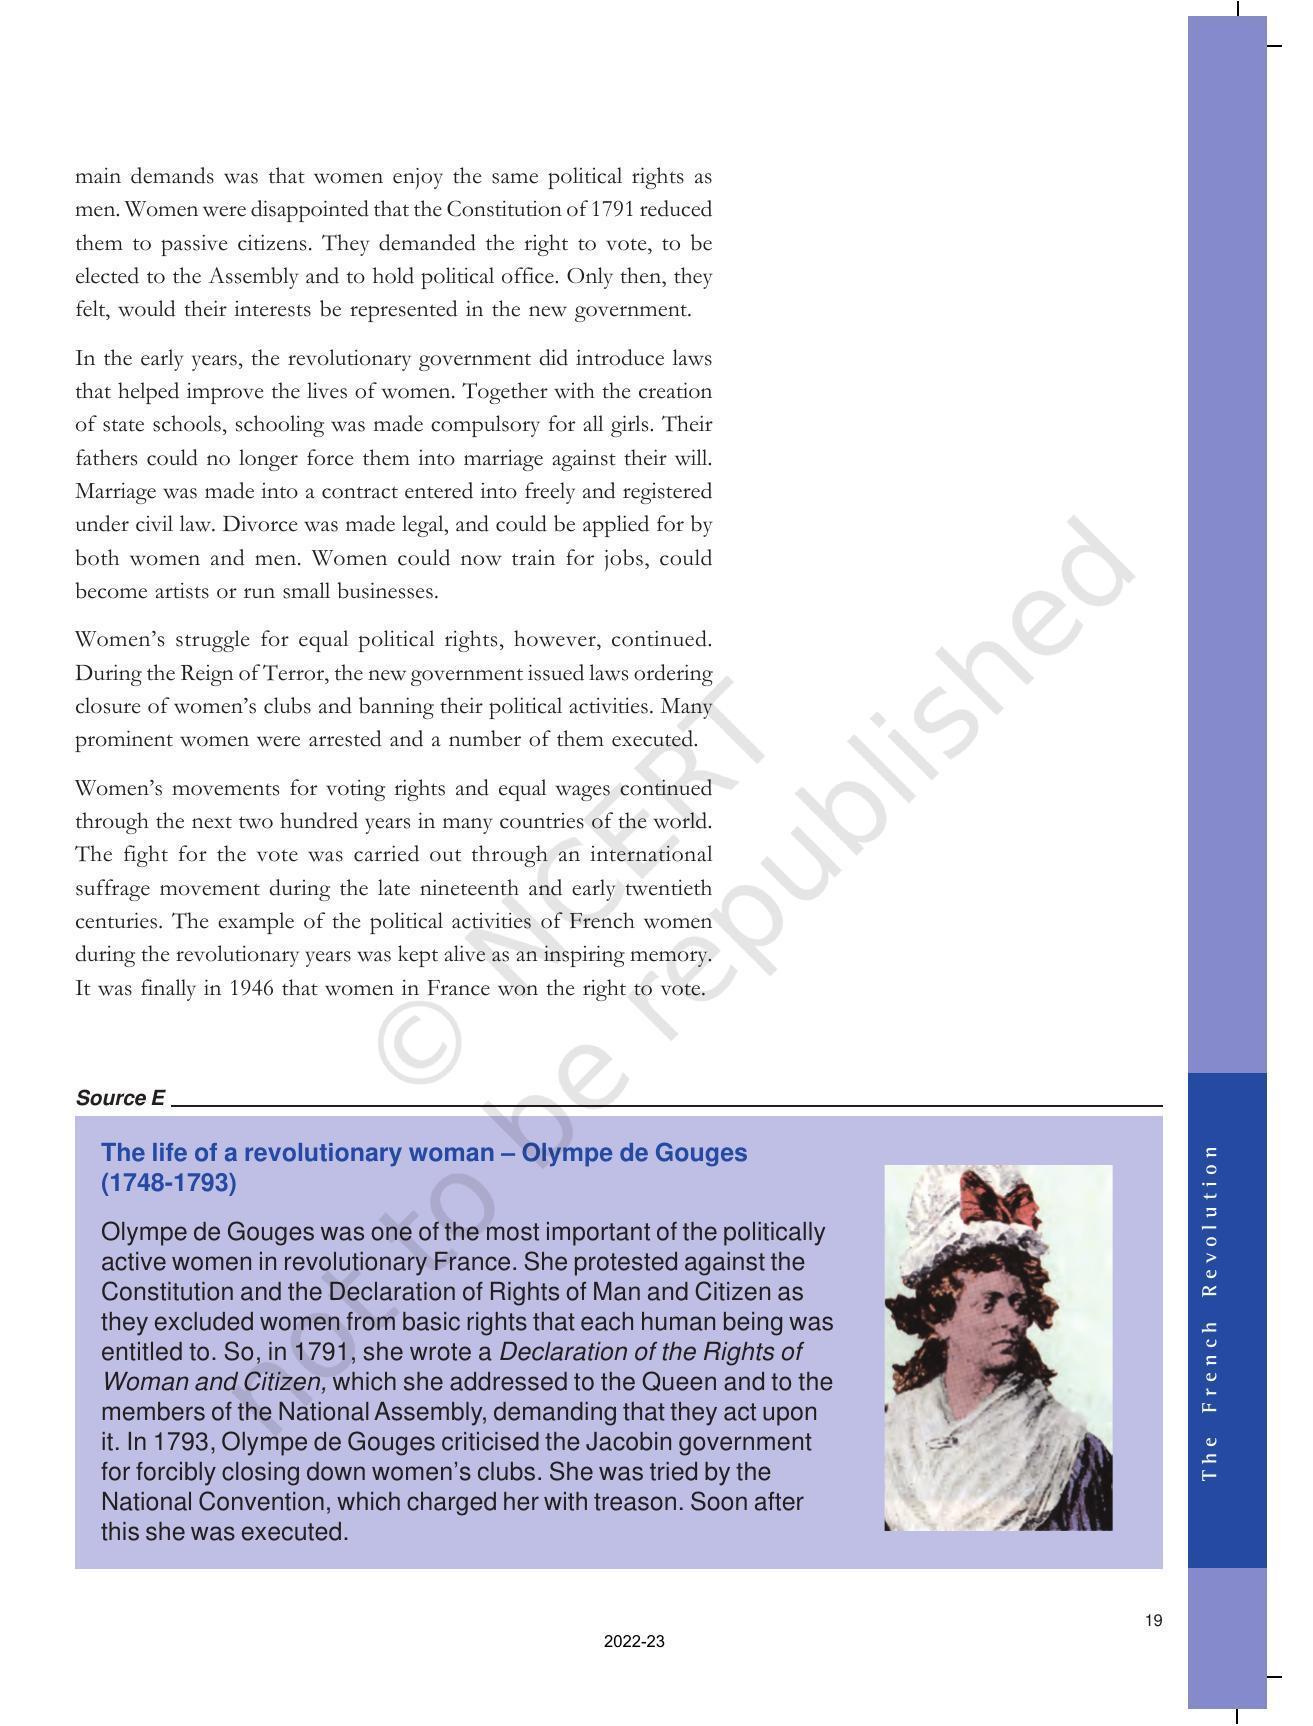 NCERT Book for Class 9 History Chapter 1 The French Revolution - Page 19